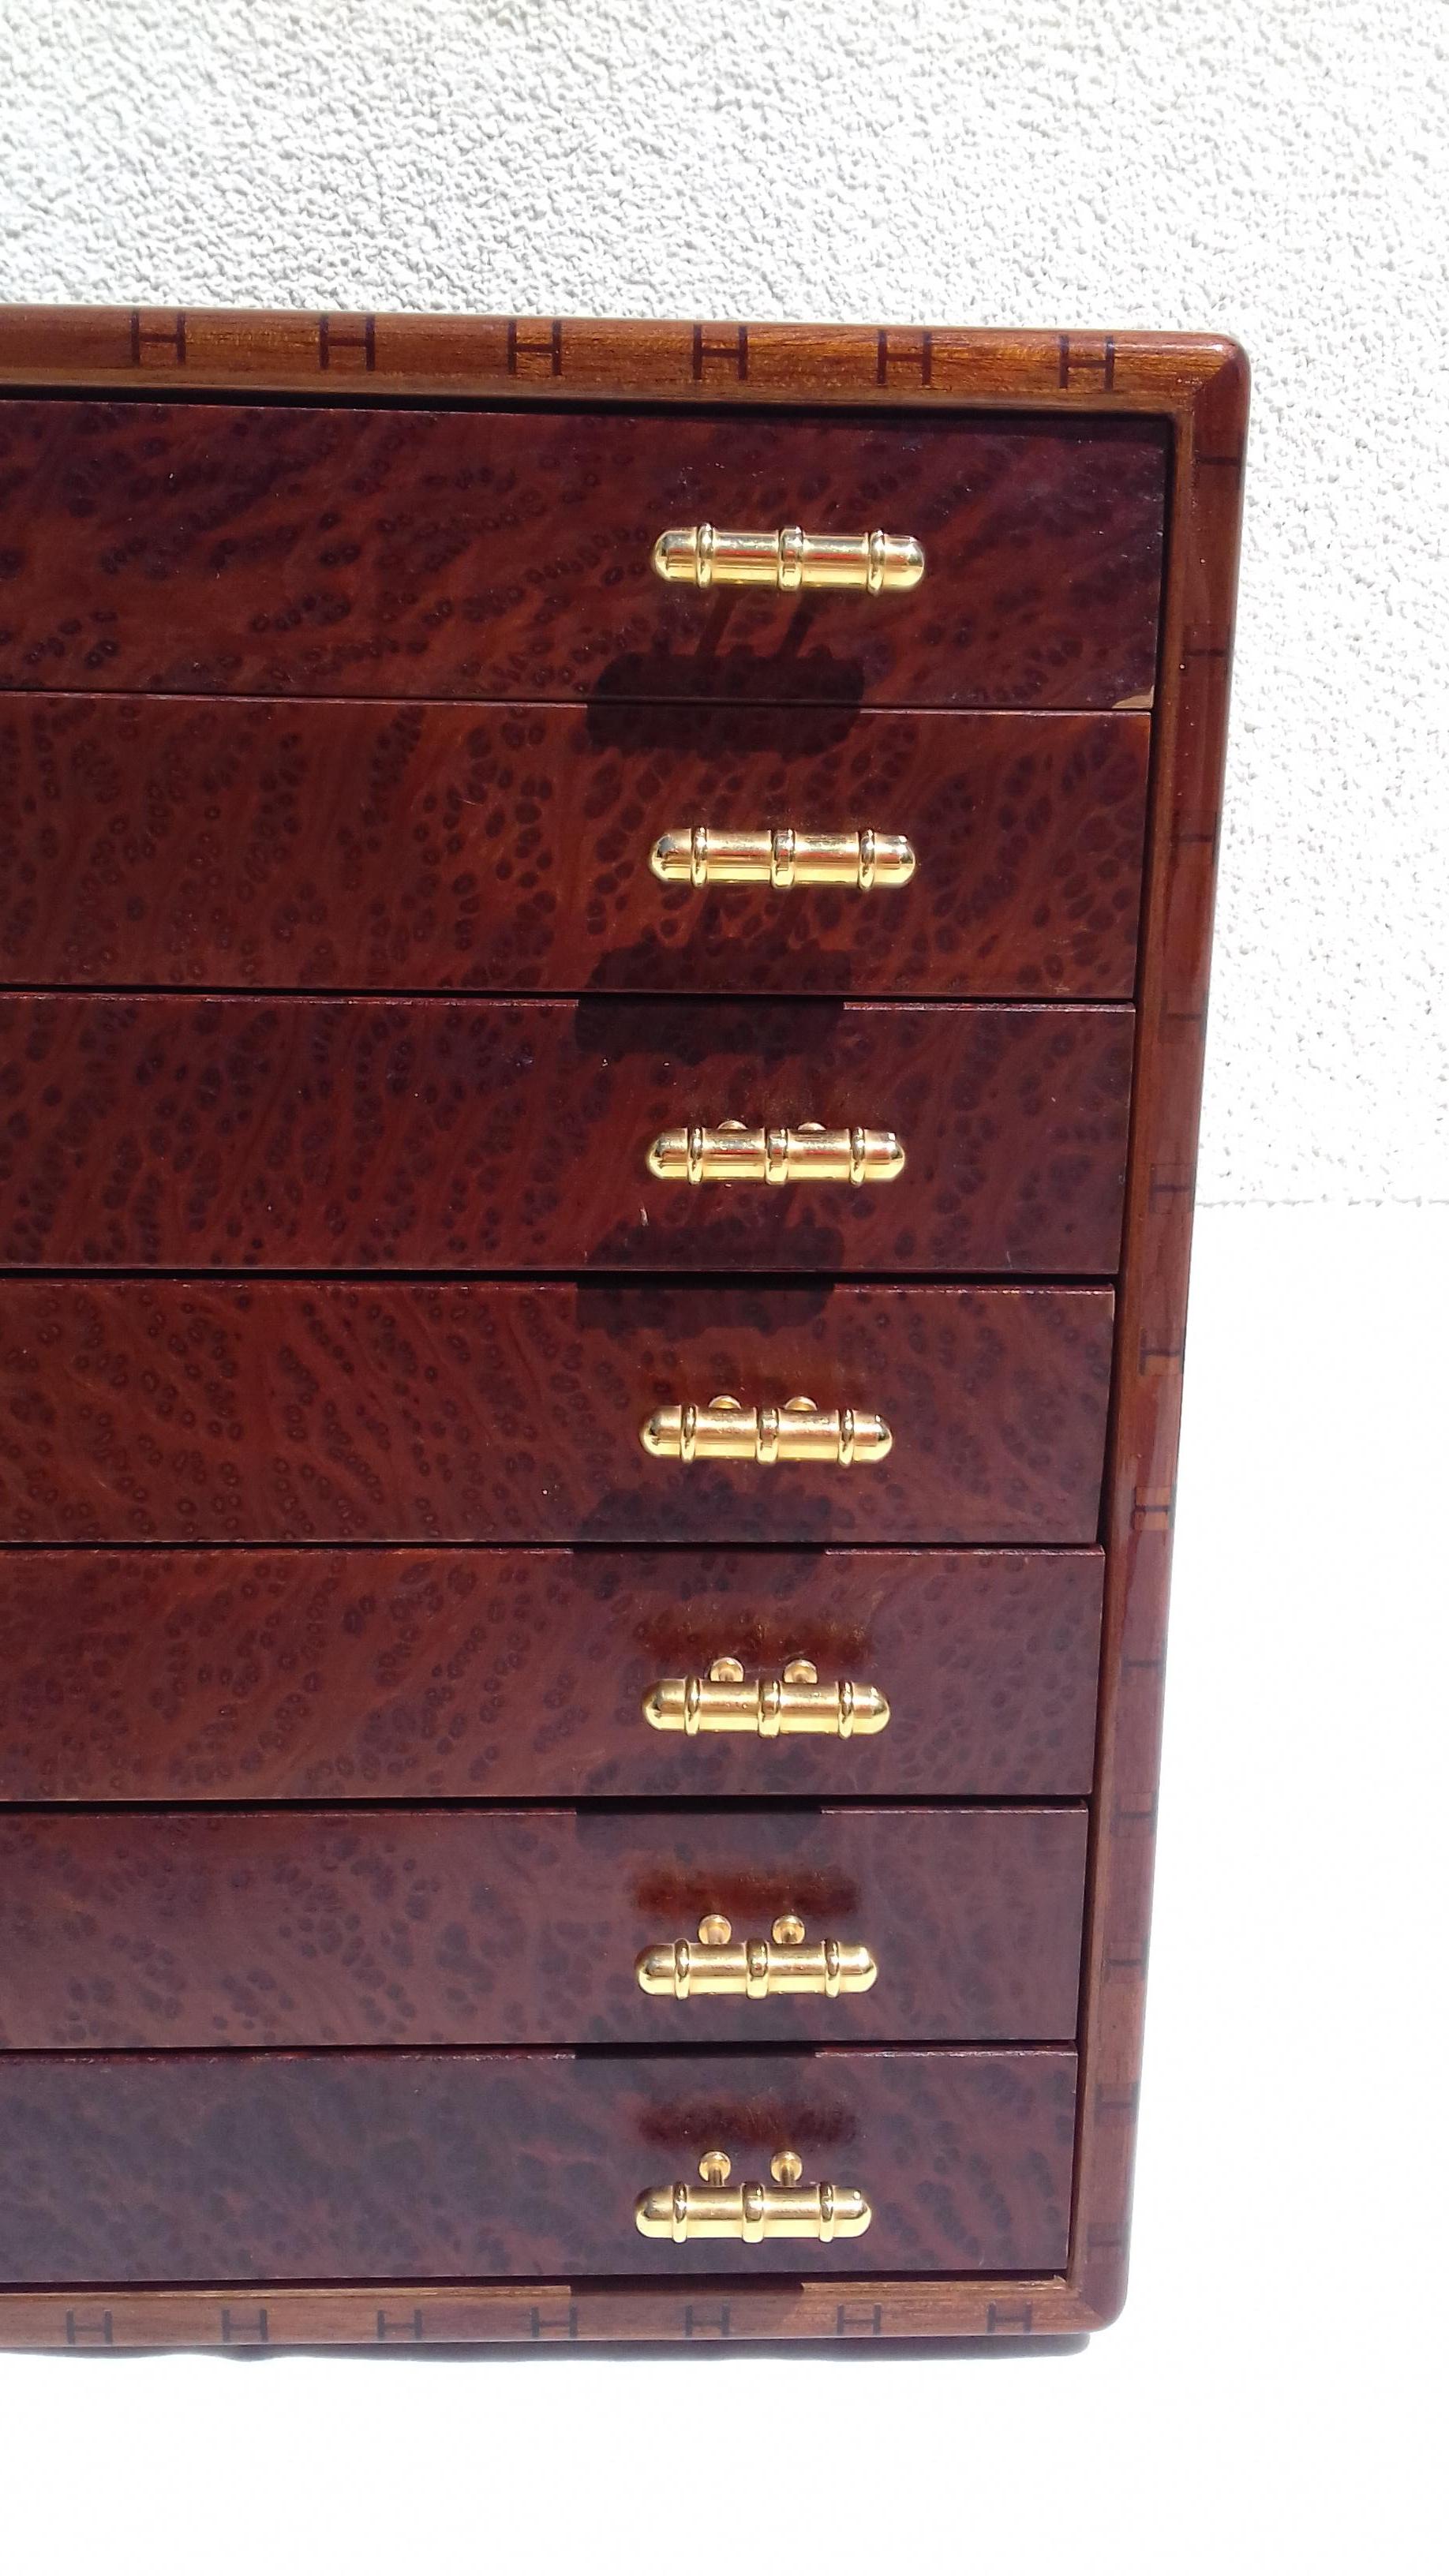 Exceptional Hermès Drawer to store scarves or Jewelry In Wood RARE 1